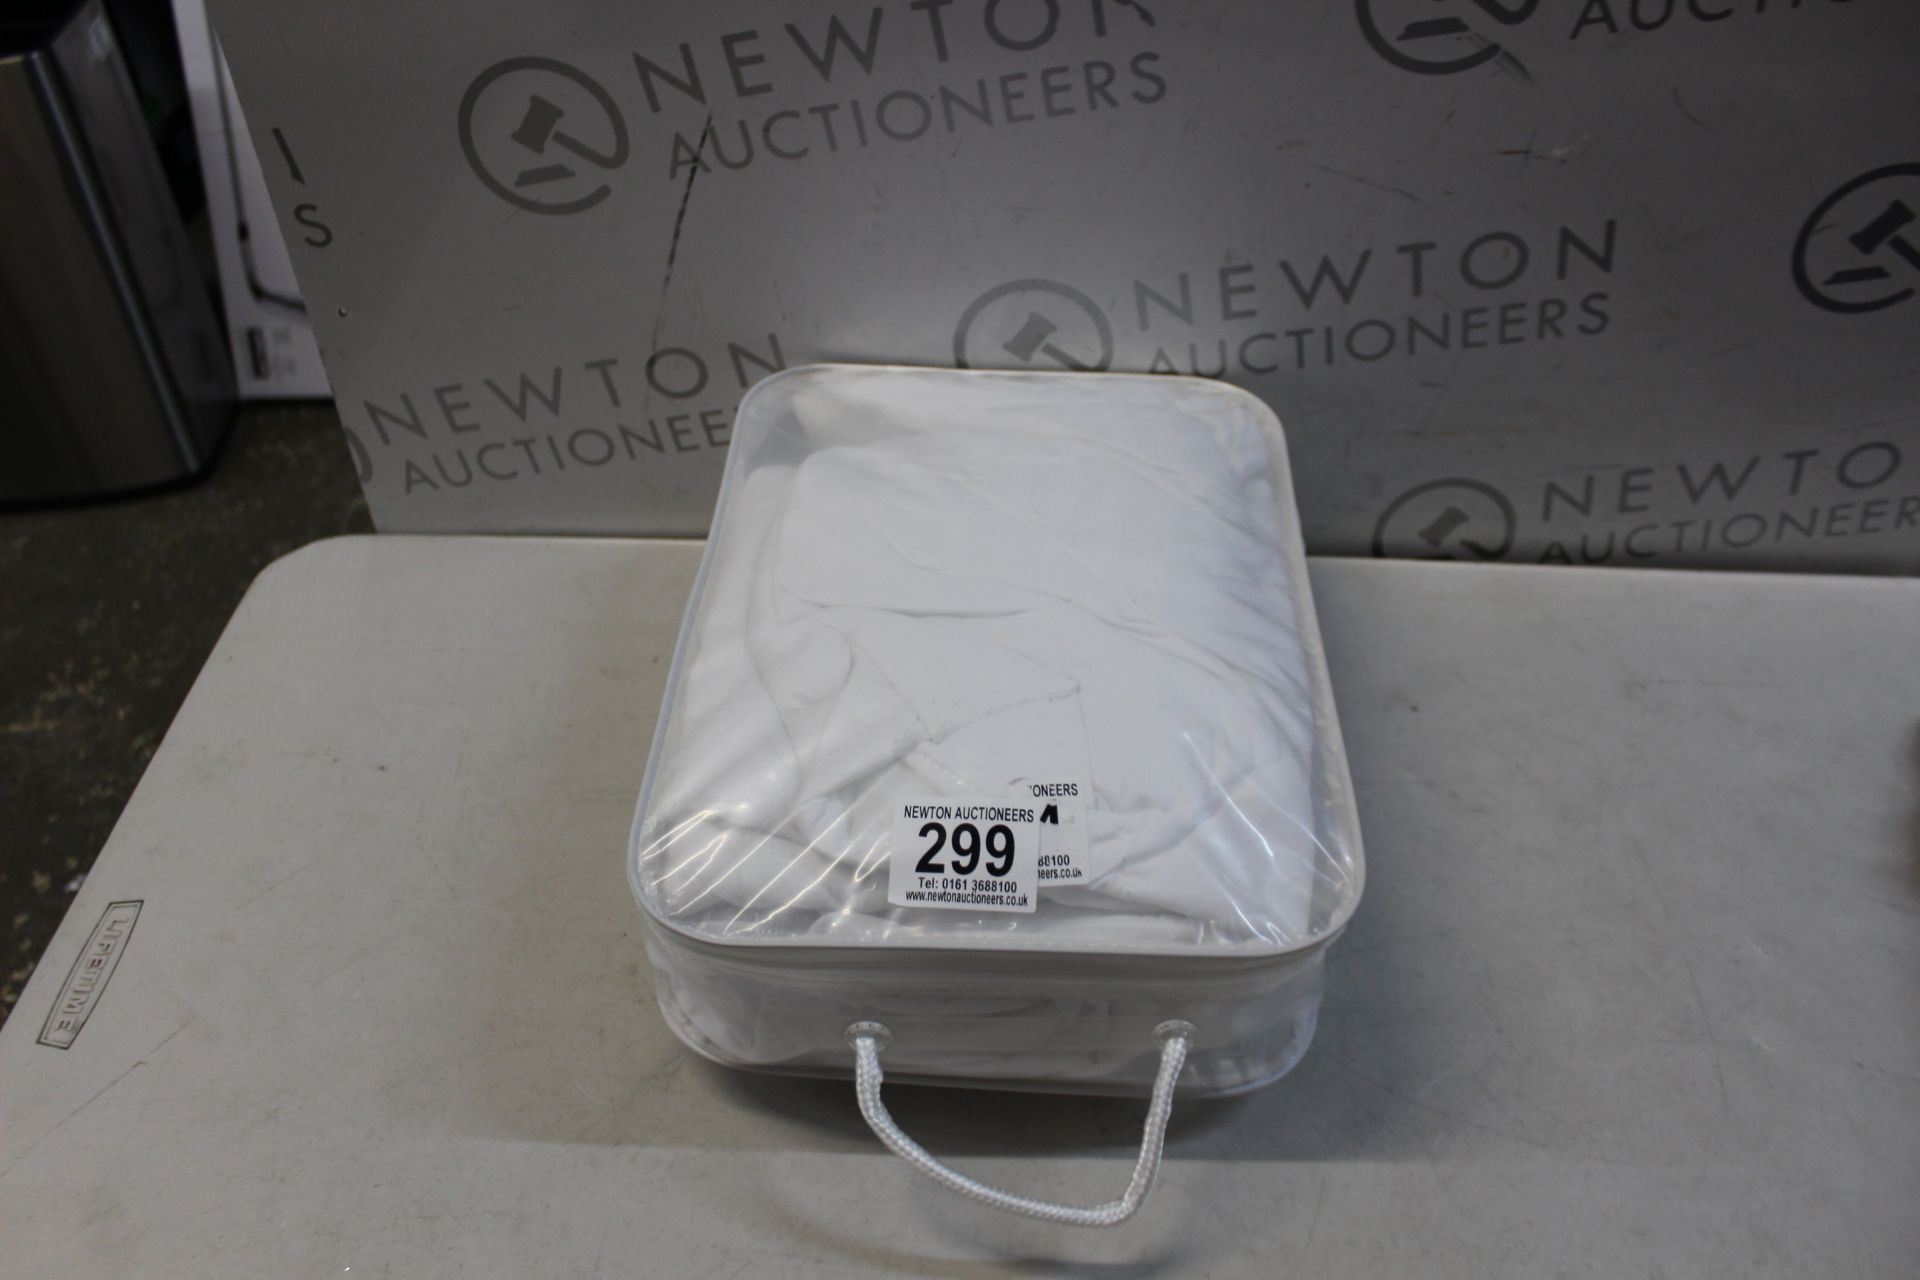 1 BAGGED SNUGGLEDOWN ANTI ALLERGY QUILTED MATTRESS & PILLOW PROTECTOR SET RRP Â£29